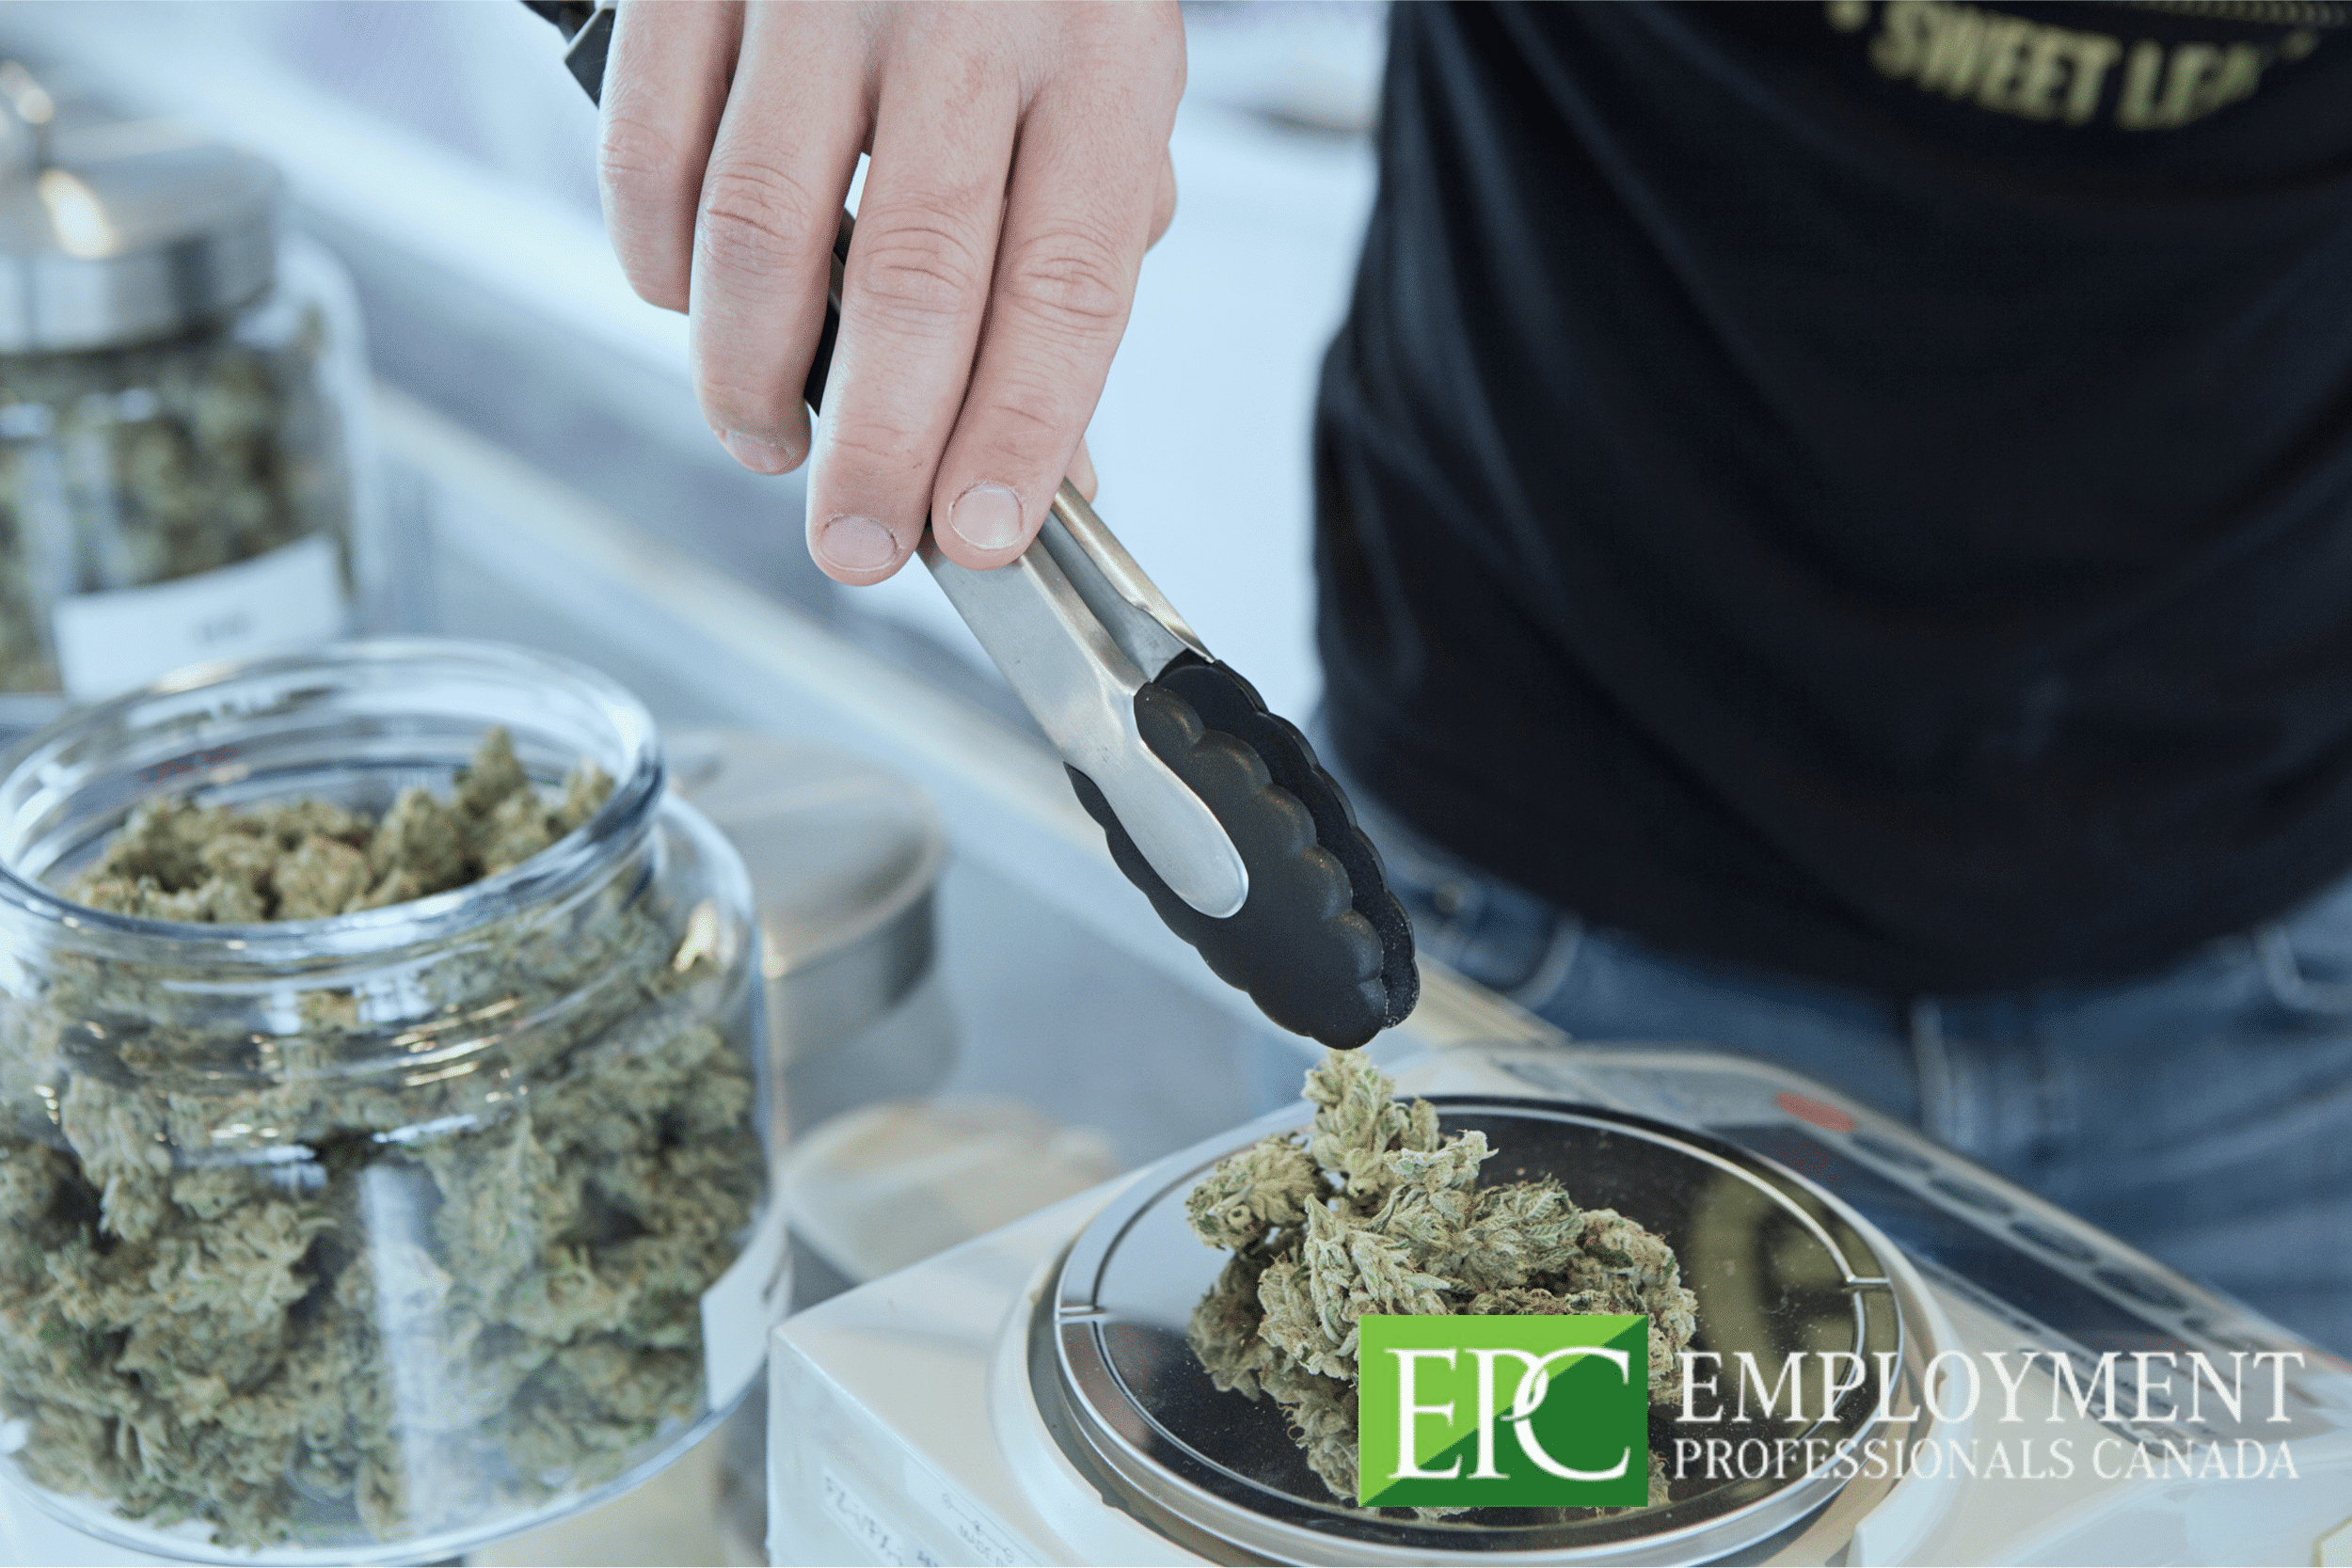 Can Cannabis Use Hurt My Job Search? Employment Professionals Canada